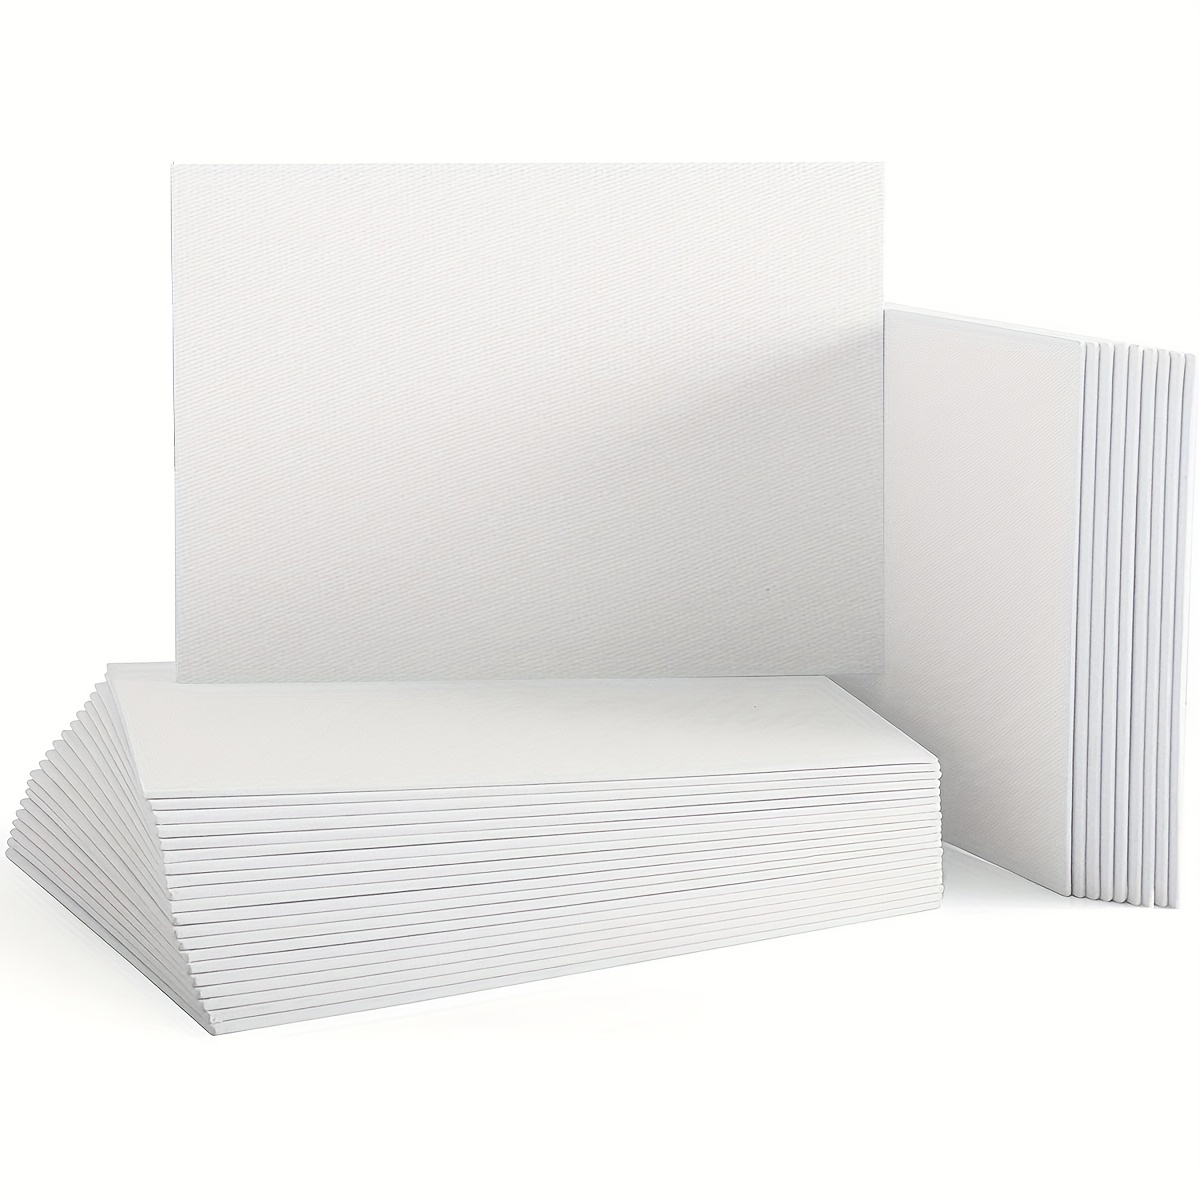  20 Pack Paint Canvases for Painting 5x7 Blank Art Canvases for  Painting Multipack Panels Paint Painting Supplies Painting Canvas Art Media  Small Canvases for Painting Flat Art Board Canvas Panel